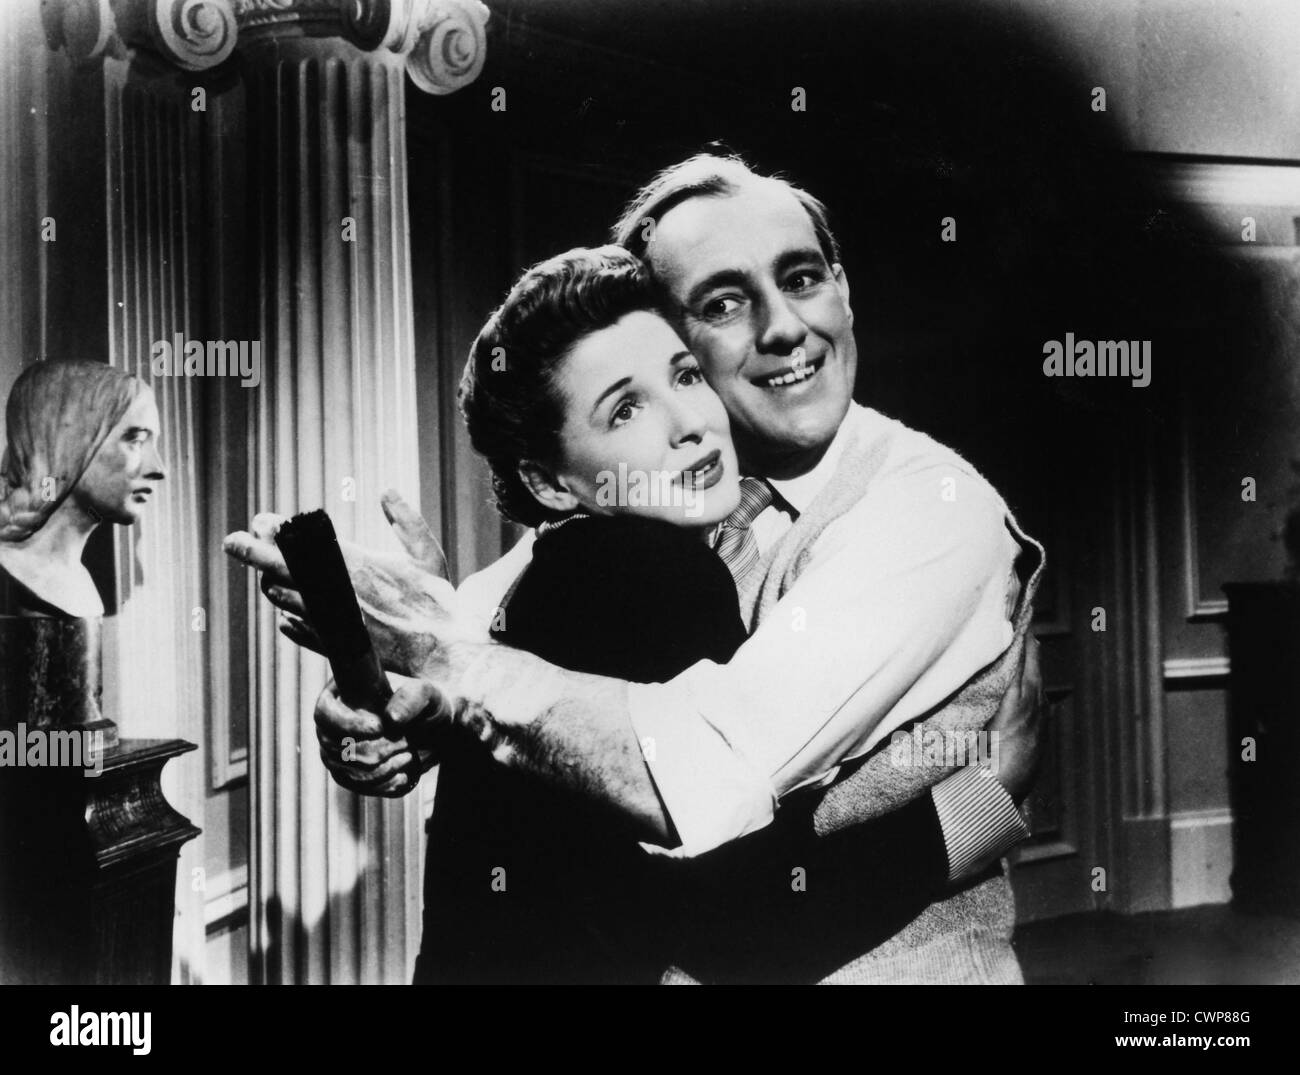 LAST HOLIDAY (1950) KAY WALSH, ALEC GUINNESS HENRY CASS (DIR) 001 MOVIESTORE COLLECTION LTD Stock Photo